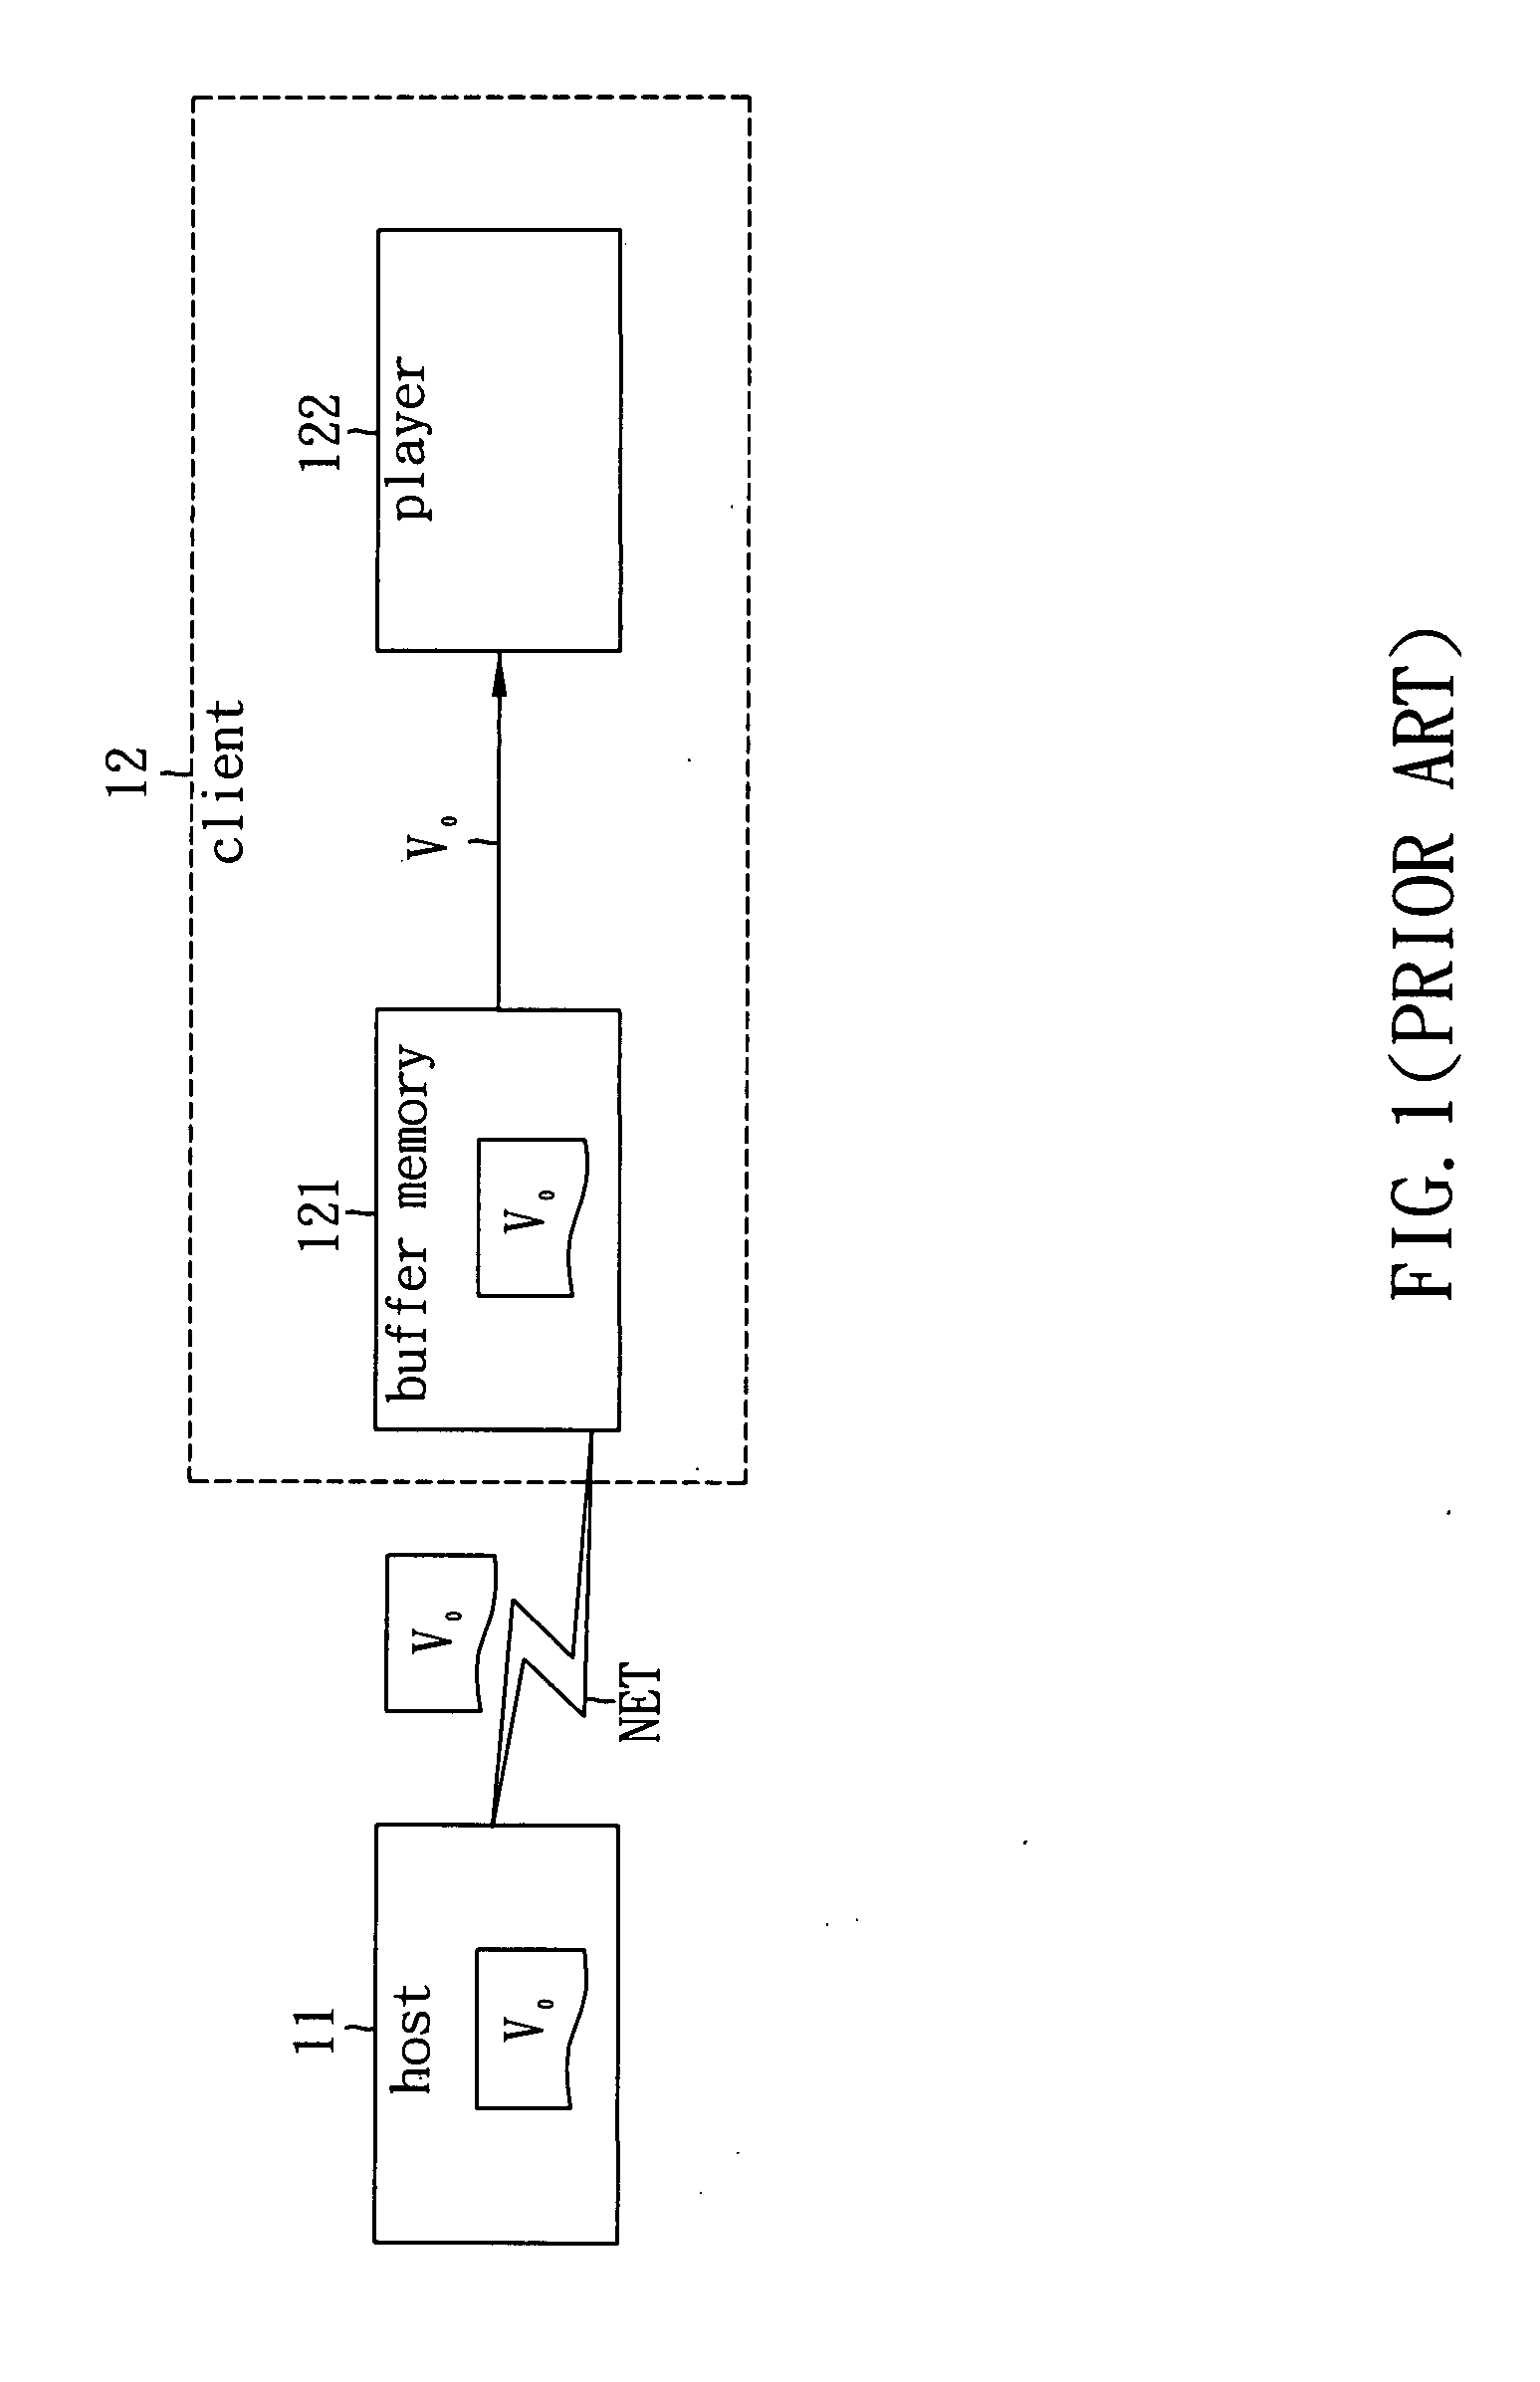 Video/audio display system and method